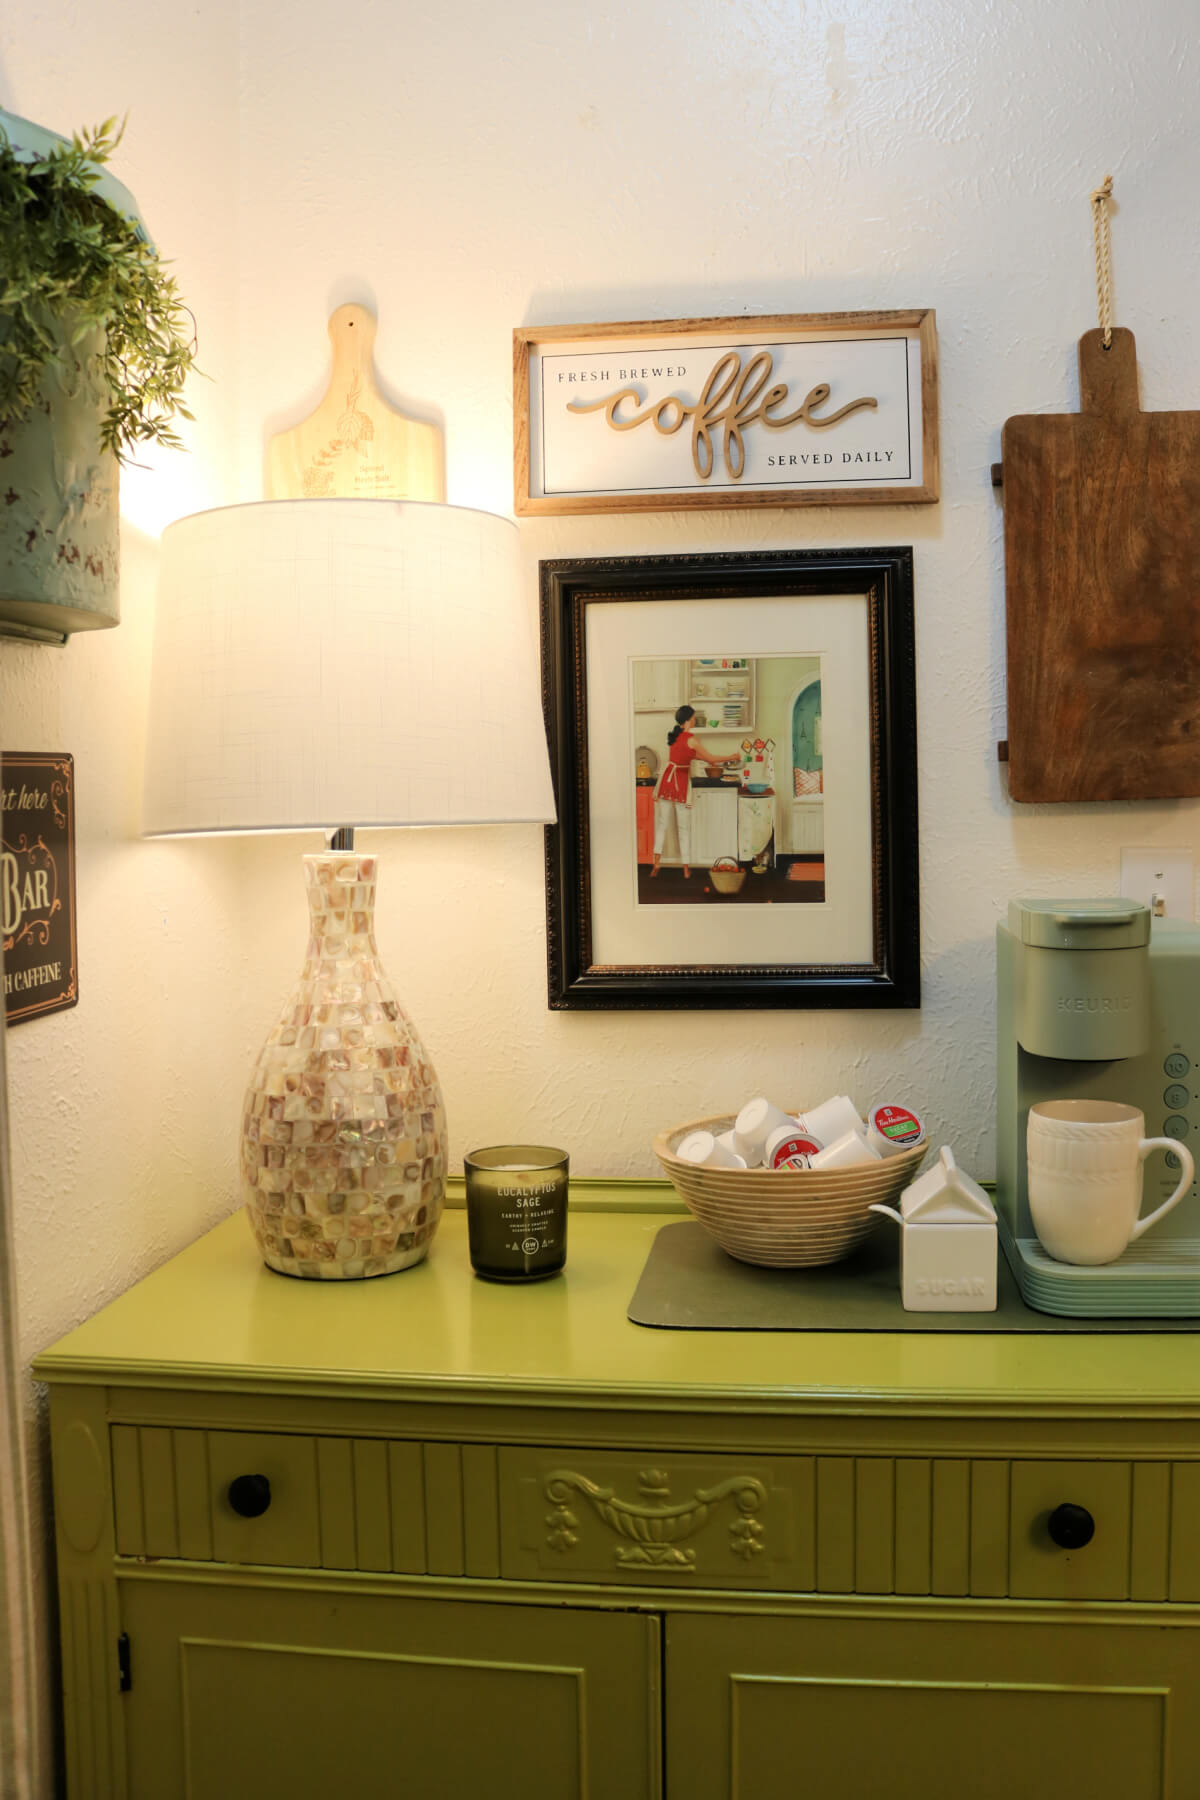 Front view of the corner of the kitchen that includes my coffee bar on a sideboard